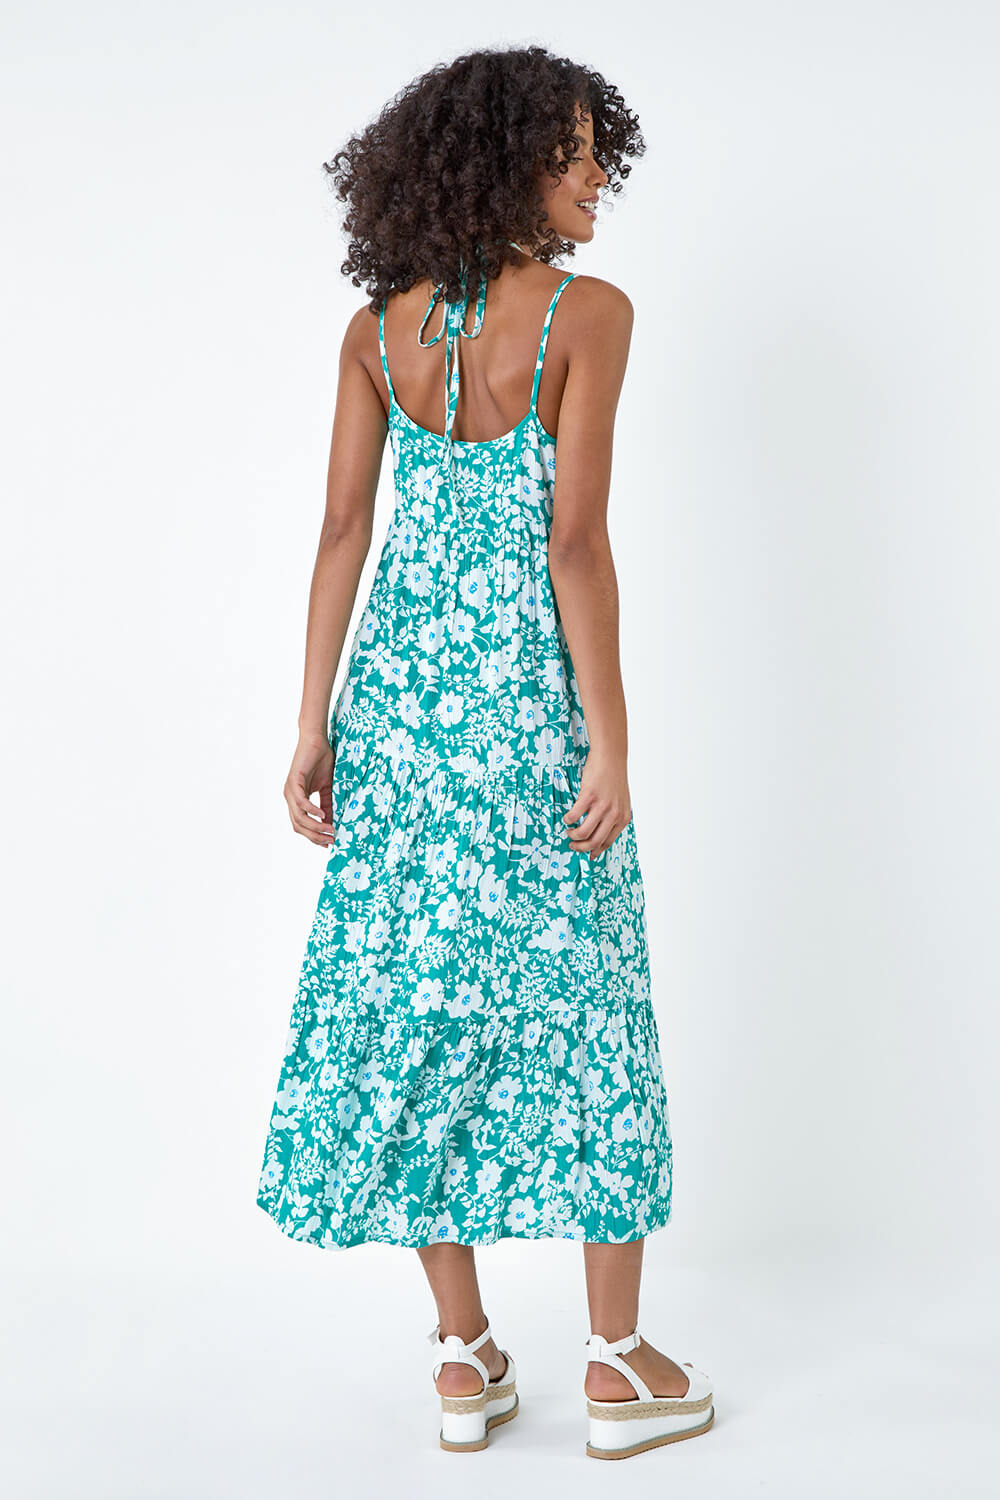 Turquoise Floral Strappy Cross Over Midi Dress, Image 3 of 5